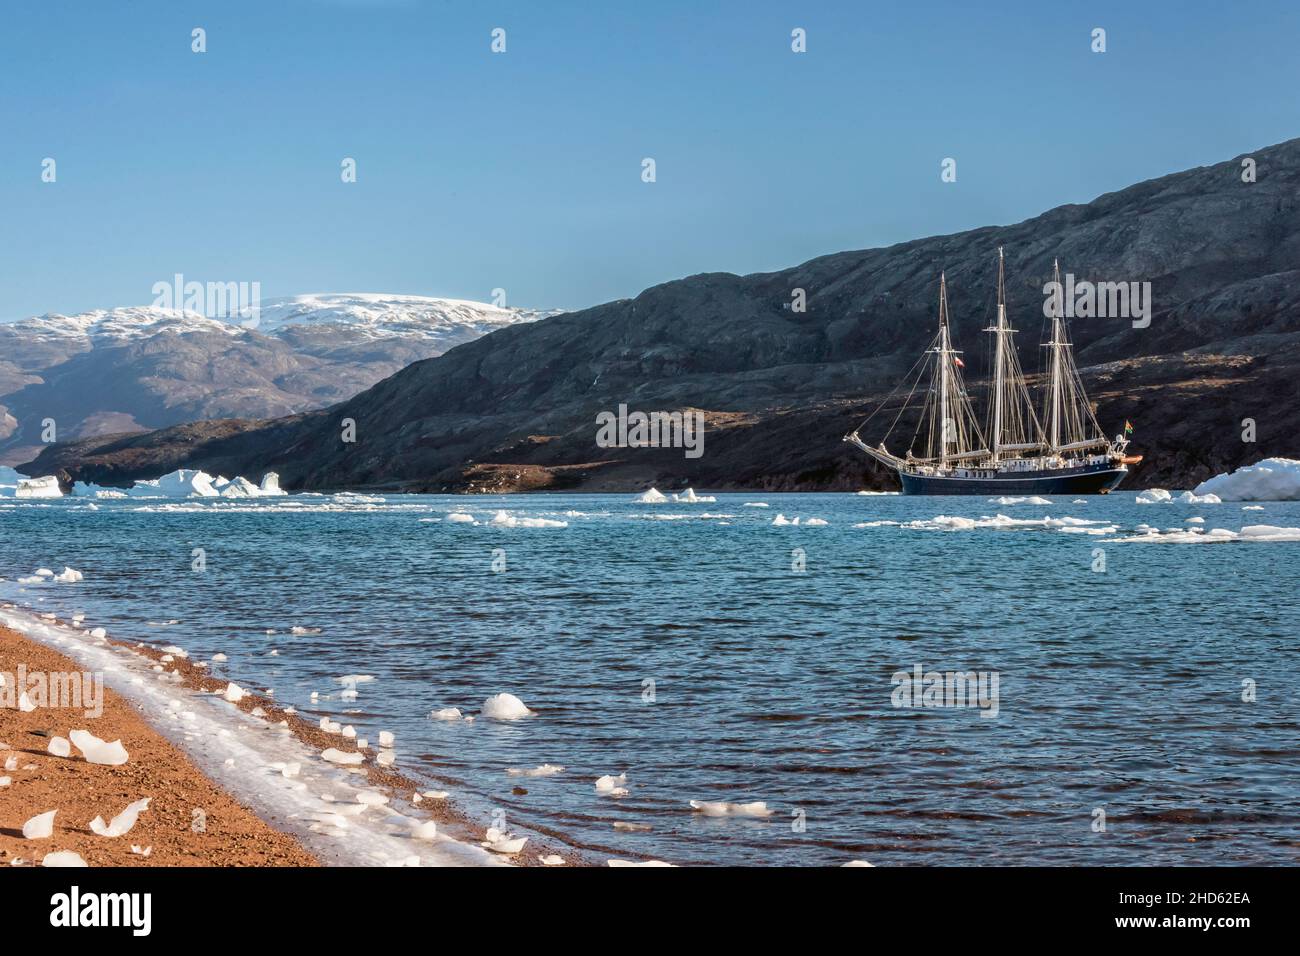 Rembrandt van Rijn off the red beach on Rode O, next to Milne Land, Rodefjord, Scoresby Sund, Greenland Stock Photo